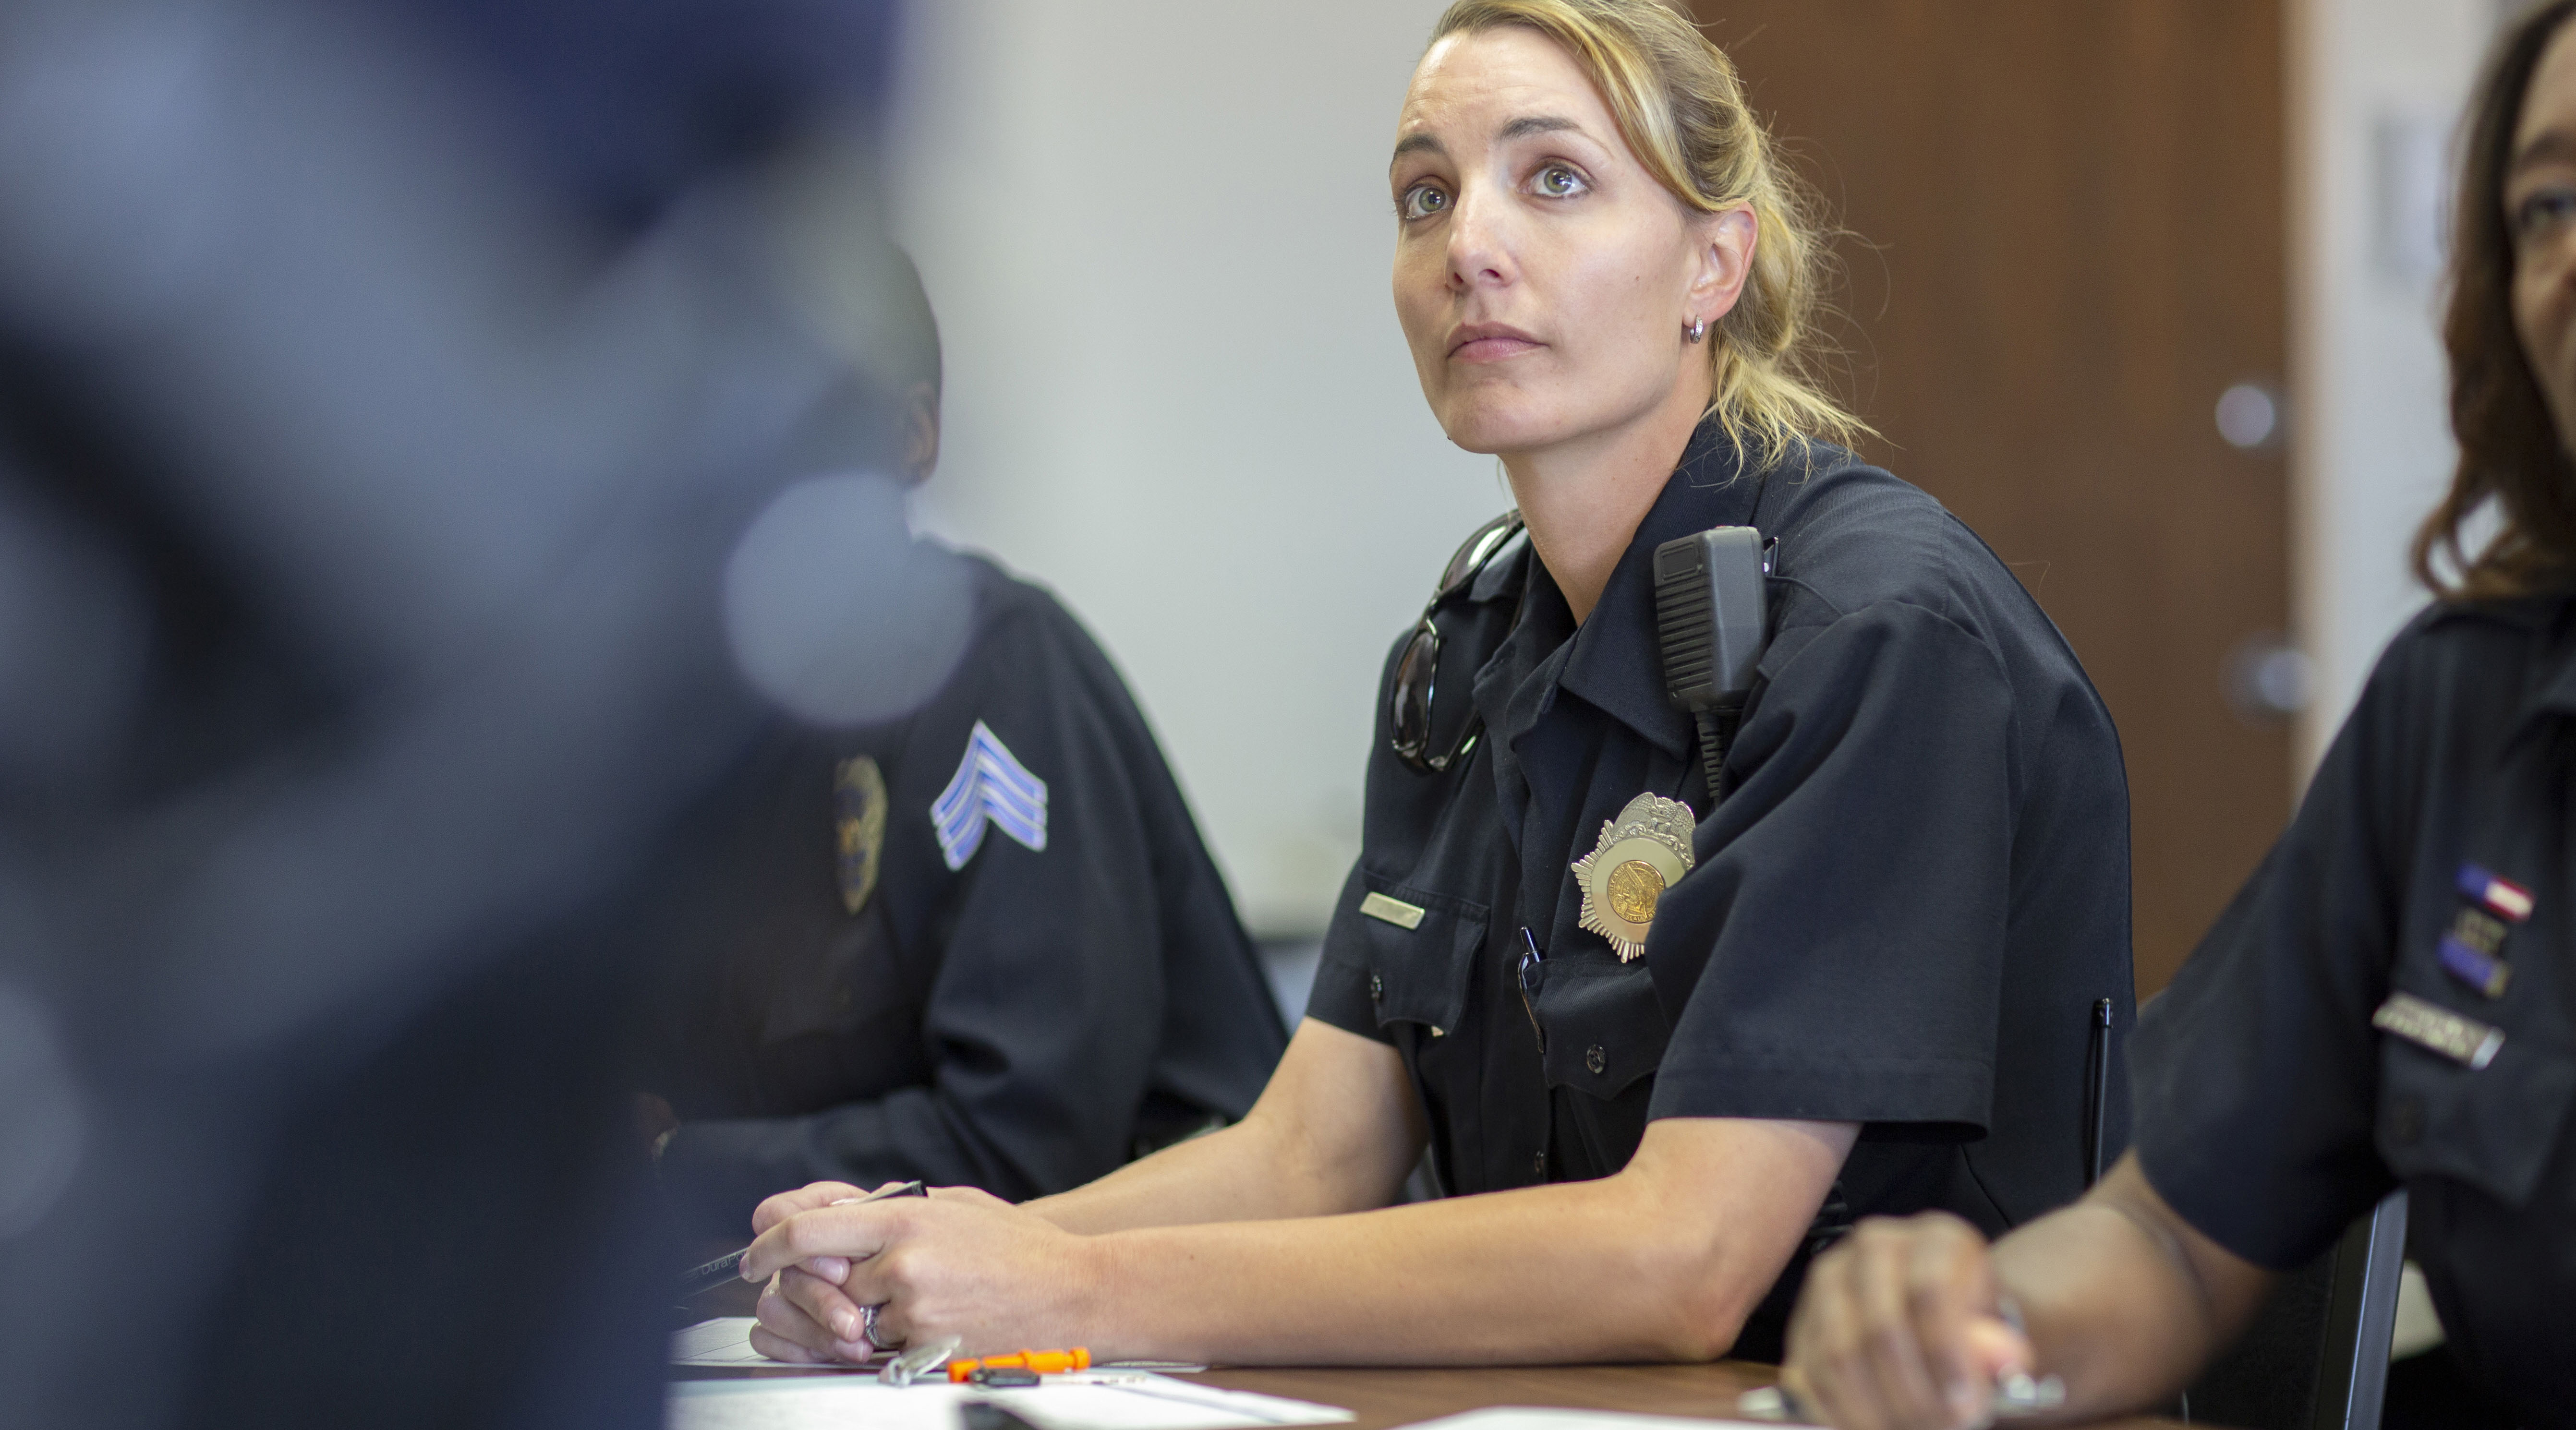 A female police officer listens to a teacher in a classroom